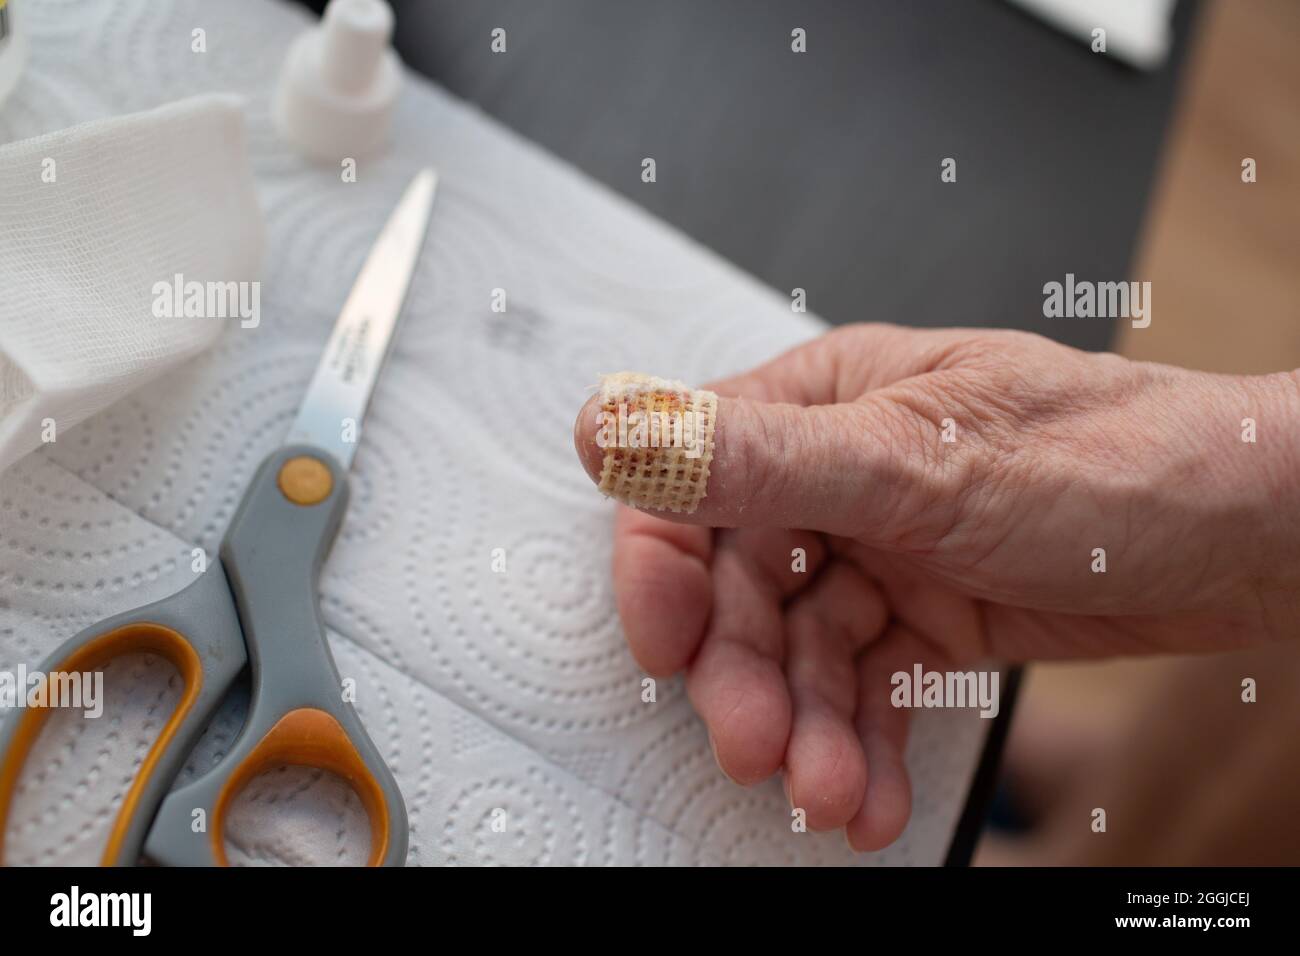 Felon whitlow on hand finger toe injured to lose nail treatment and removed nail Stock Photo